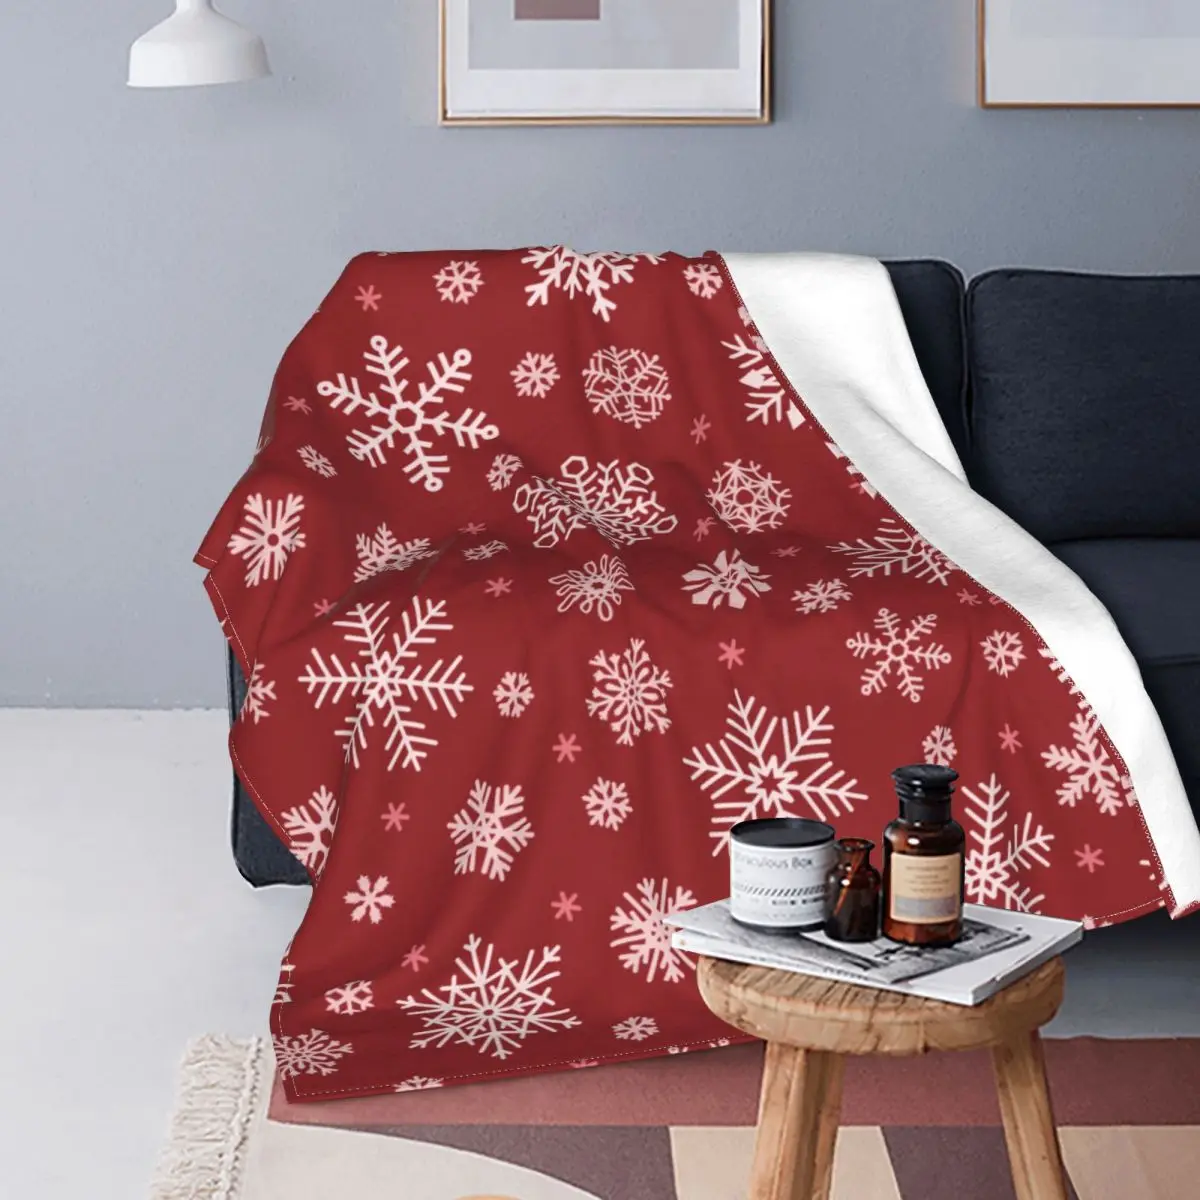 

Red Merry Christmas Blanket Fleece New Year Snowflake Lightweight Thin Throw Blankets for Car Sofa Couch Bedroom Quilt